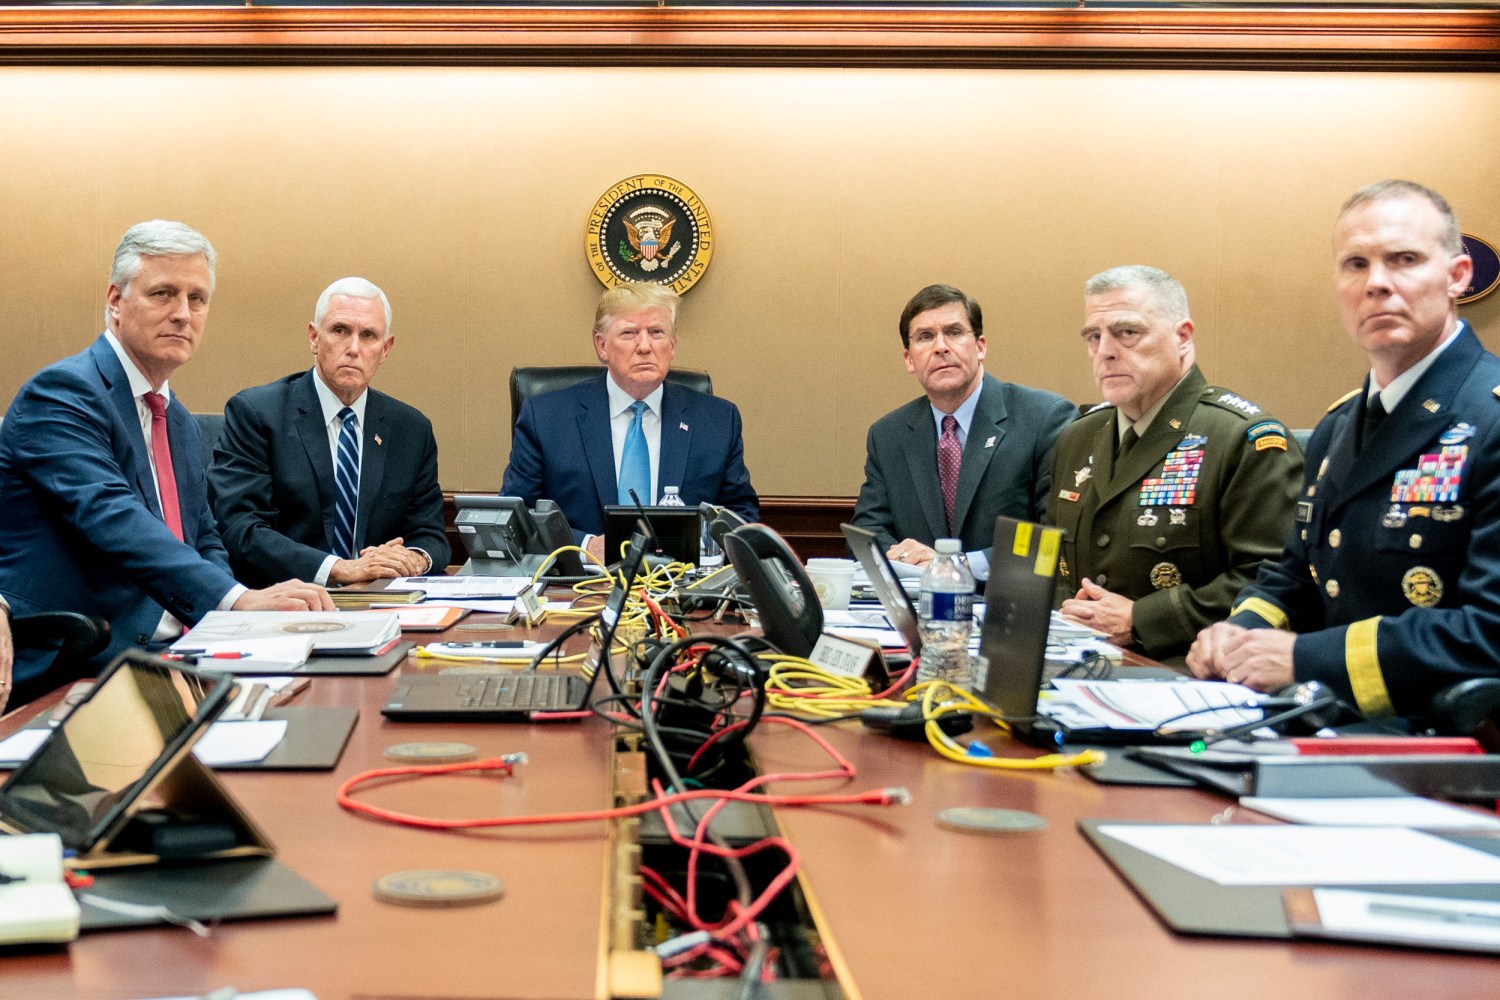 U.S. President Donald Trump, U.S. Vice President Mike Pence (2nd L), U.S. Secretary of Defense Mark Esper (3rd R), along with members of the national security team, watch as U.S. Special Operations forces close in on ISIS leader Abu Bakr al-Baghdadi, in the Situation Room of the White House in Washington, U.S., October 26, 2019. Picture taken October 26, 2019.  Shealah Craighead/The White House/Handout via REUTERS  THIS IMAGE HAS BEEN SUPPLIED BY A THIRD PARTY.     TPX IMAGES OF THE DAY - RC1CACE38AD0